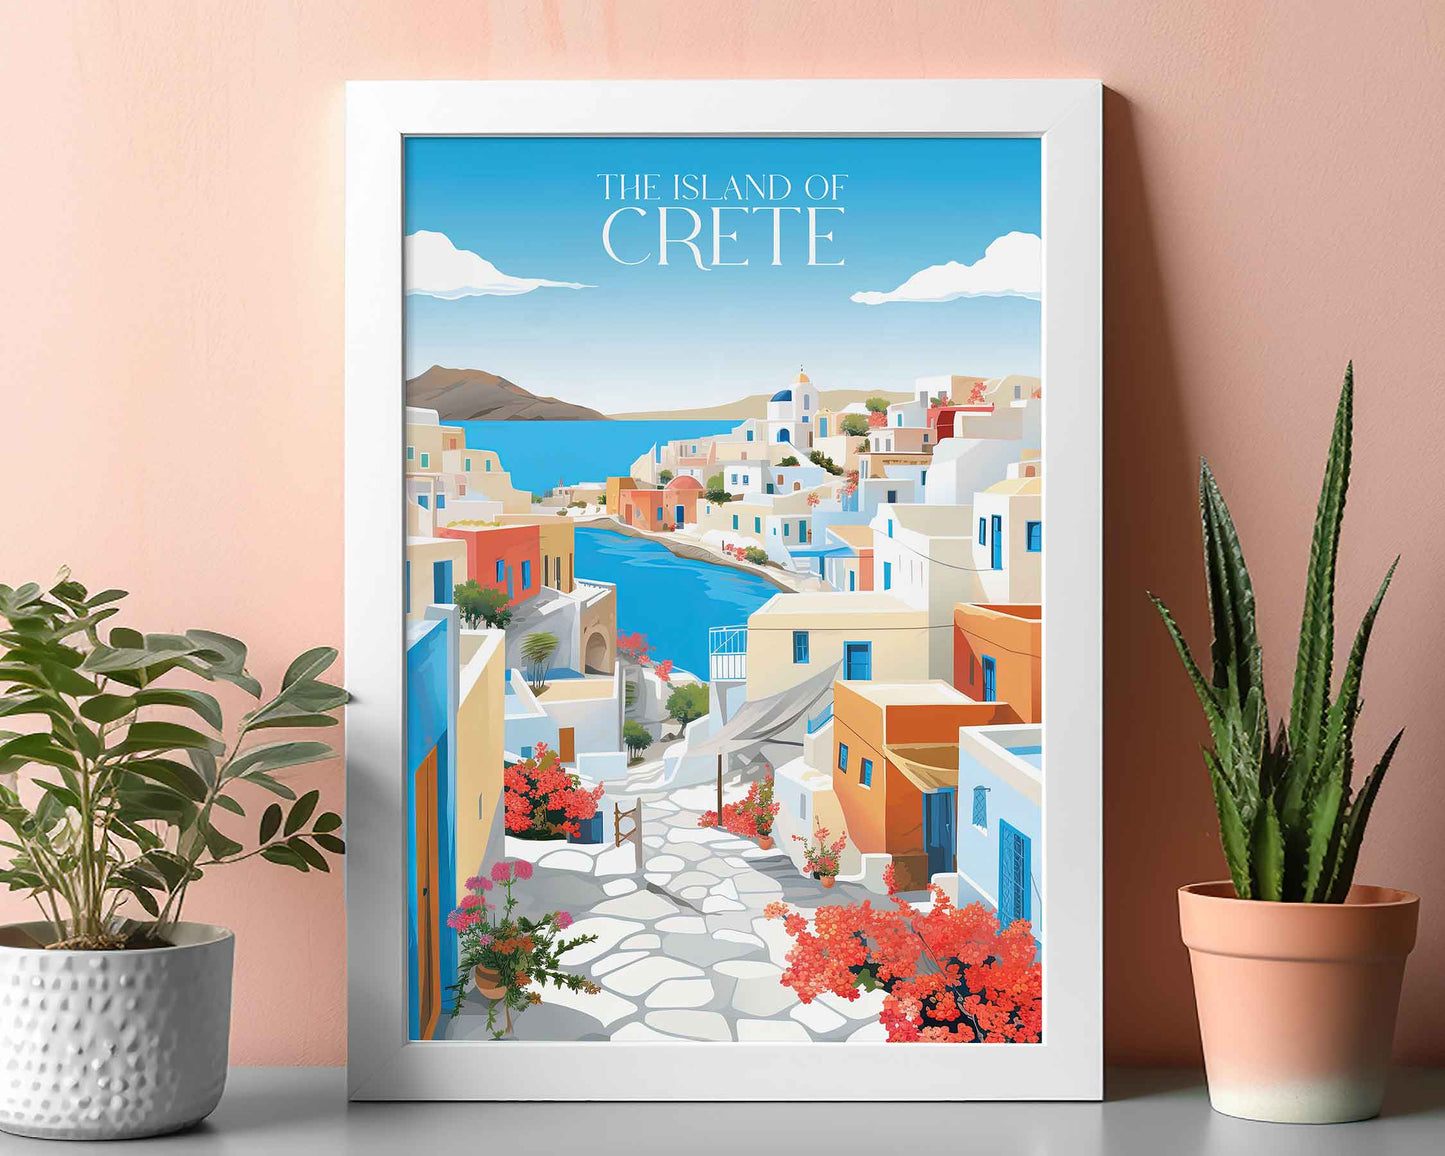 Framed Image of Island of Crete, Greece Travel Poster Print Wall Art